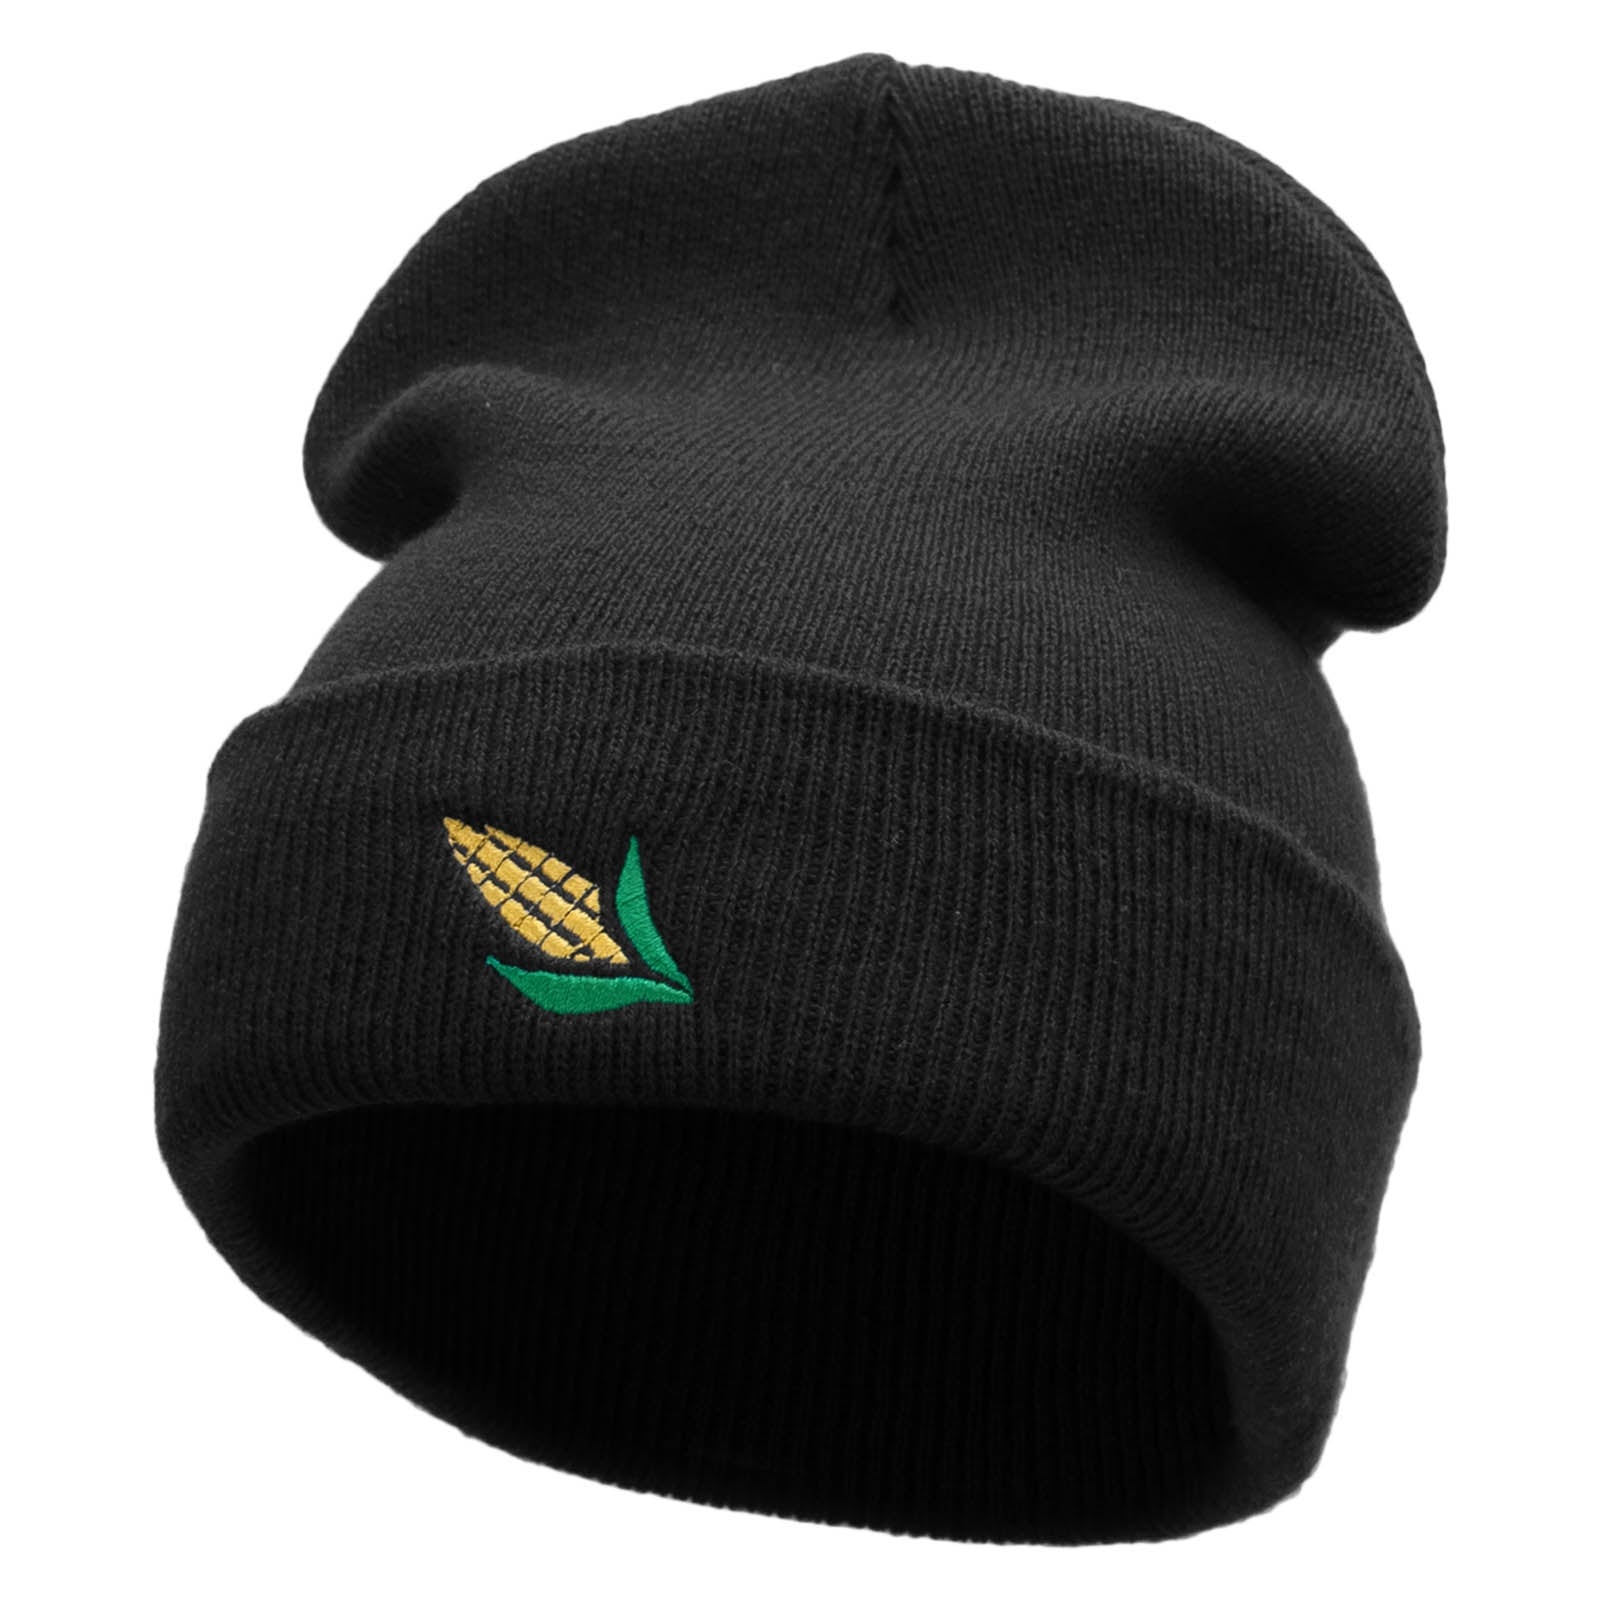 Corn Cob Embroidered 12 Inch Solid Long Beanie Made in USA - Black OSFM